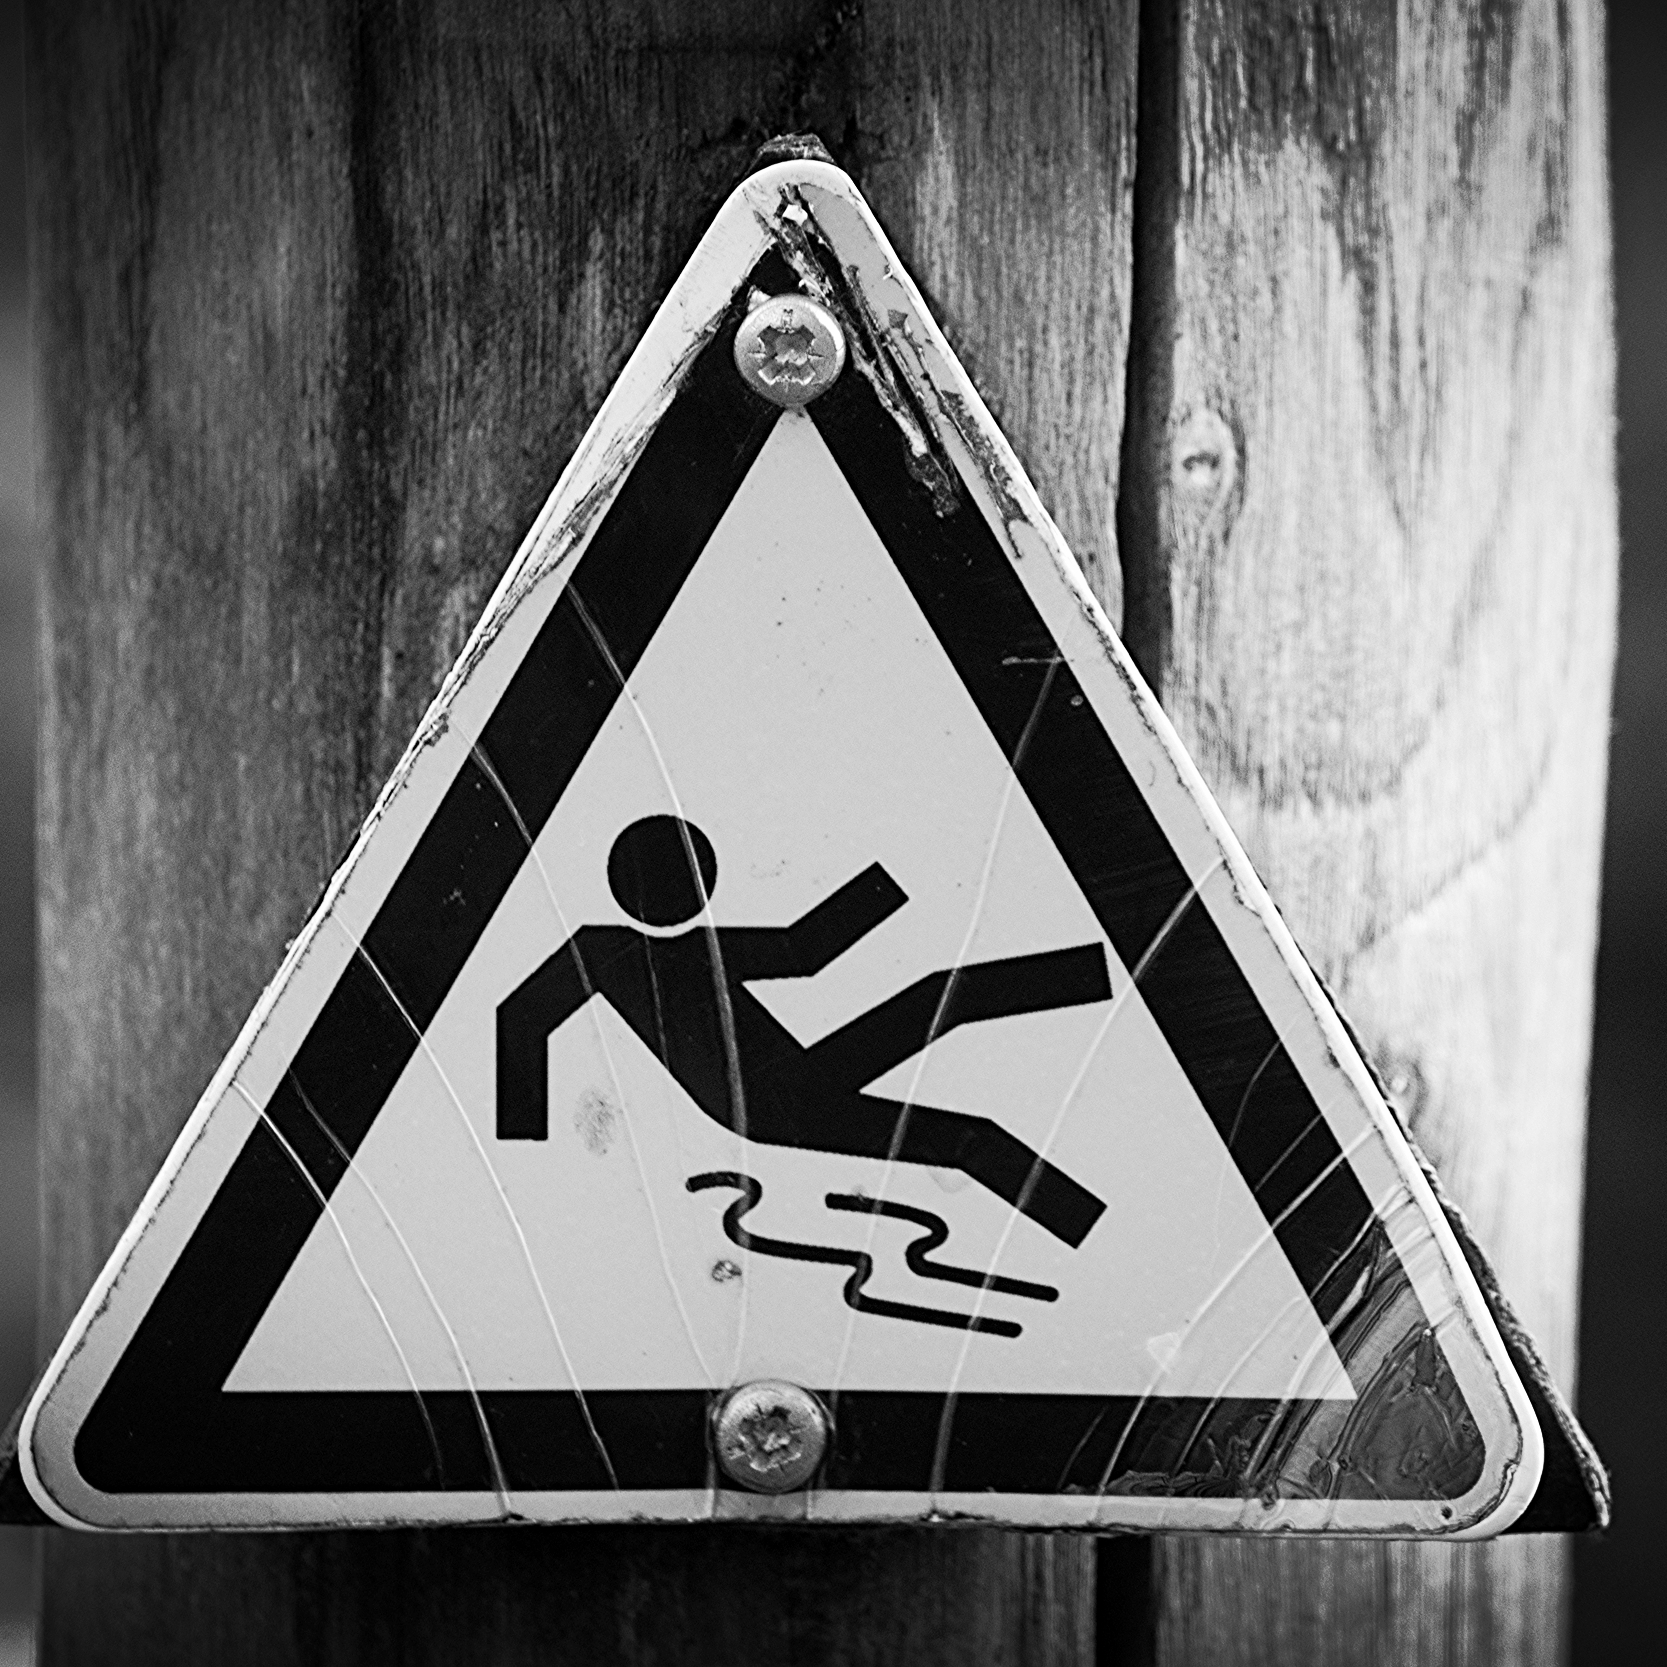 SLIP AND FALL